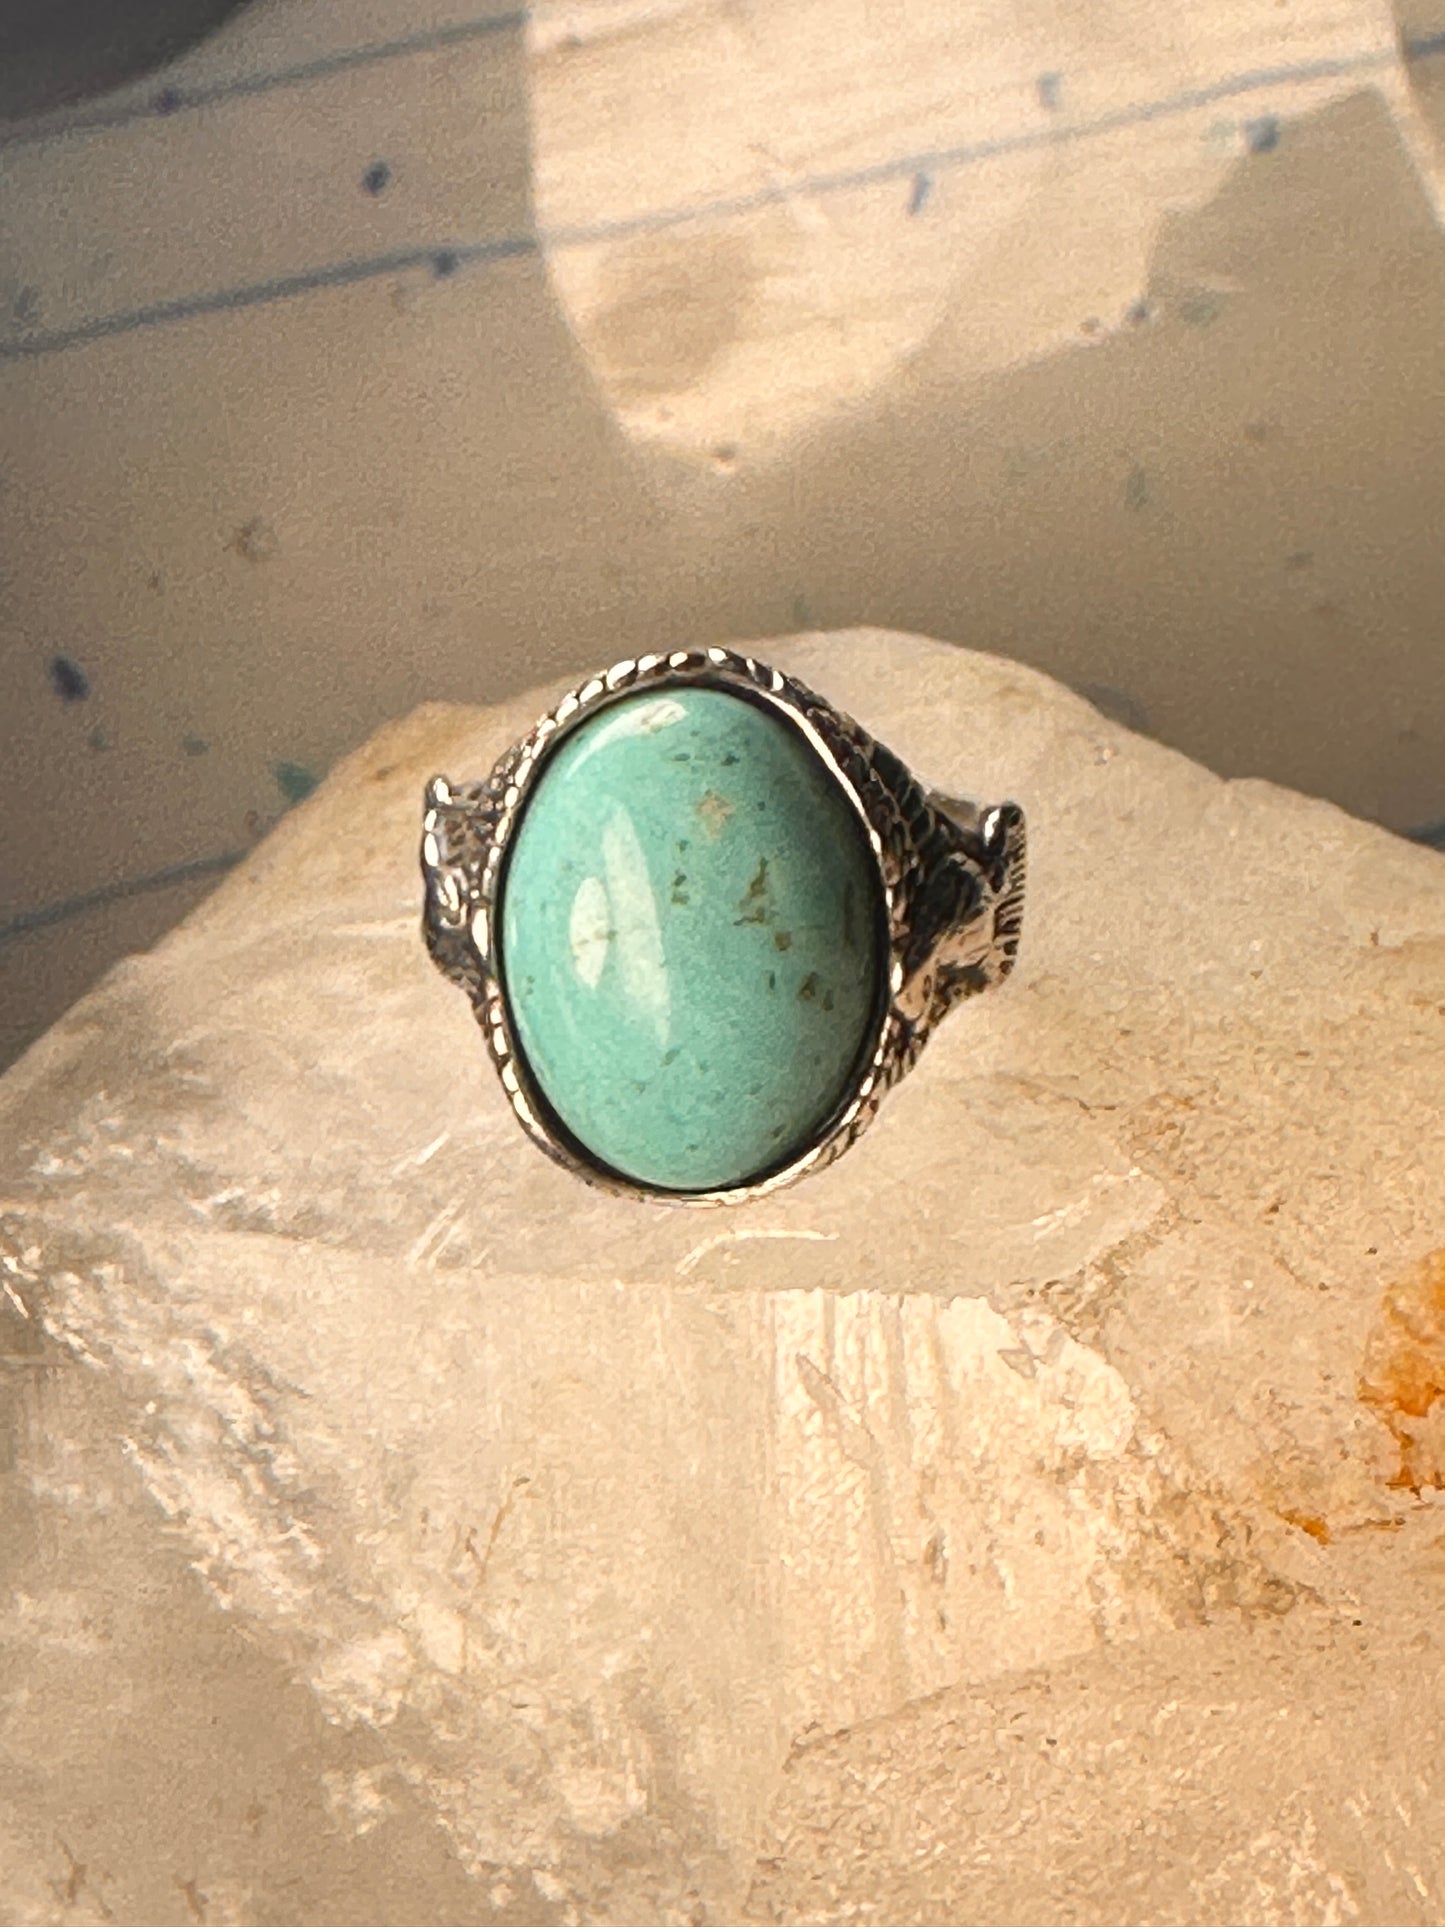 Eagle ring turquoise Carolyn Pollack size 8.75 sterling silver women men